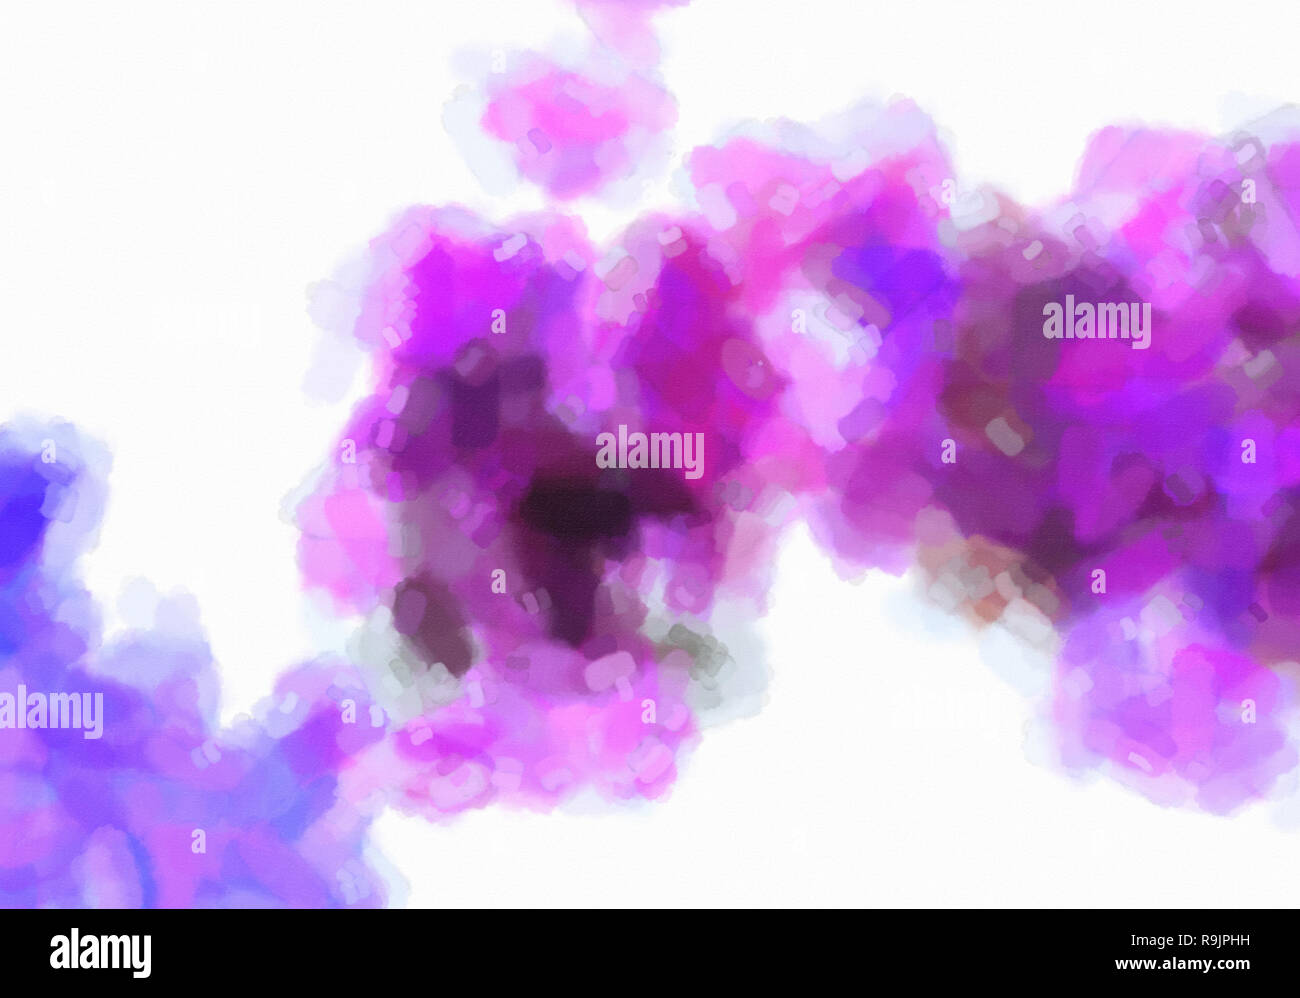 Magenta, purple, and black blotches, watercolor gradient background. Colorful digital illustration simulating true watercolor with paper texture. Stock Photo